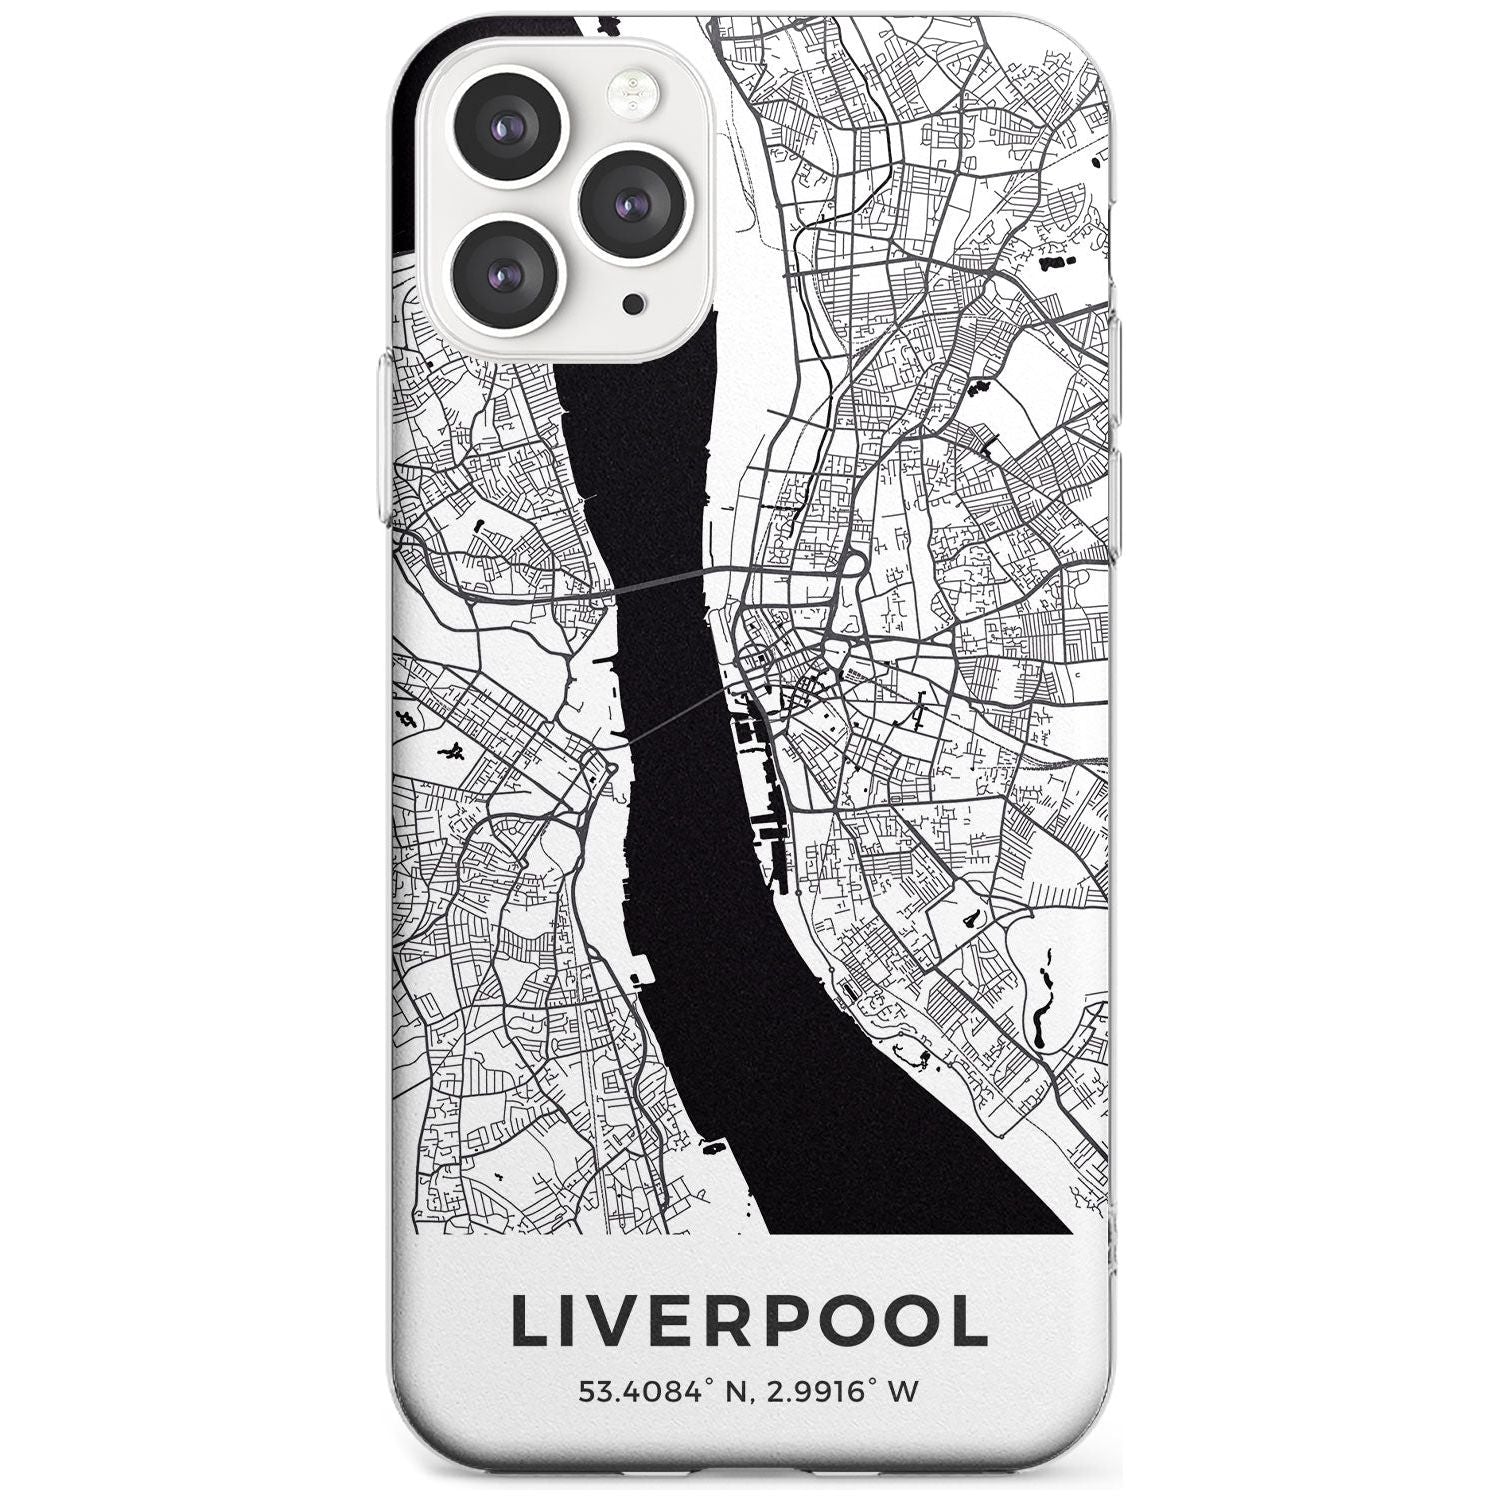 Map of Liverpool, England Slim TPU Phone Case for iPhone 11 Pro Max